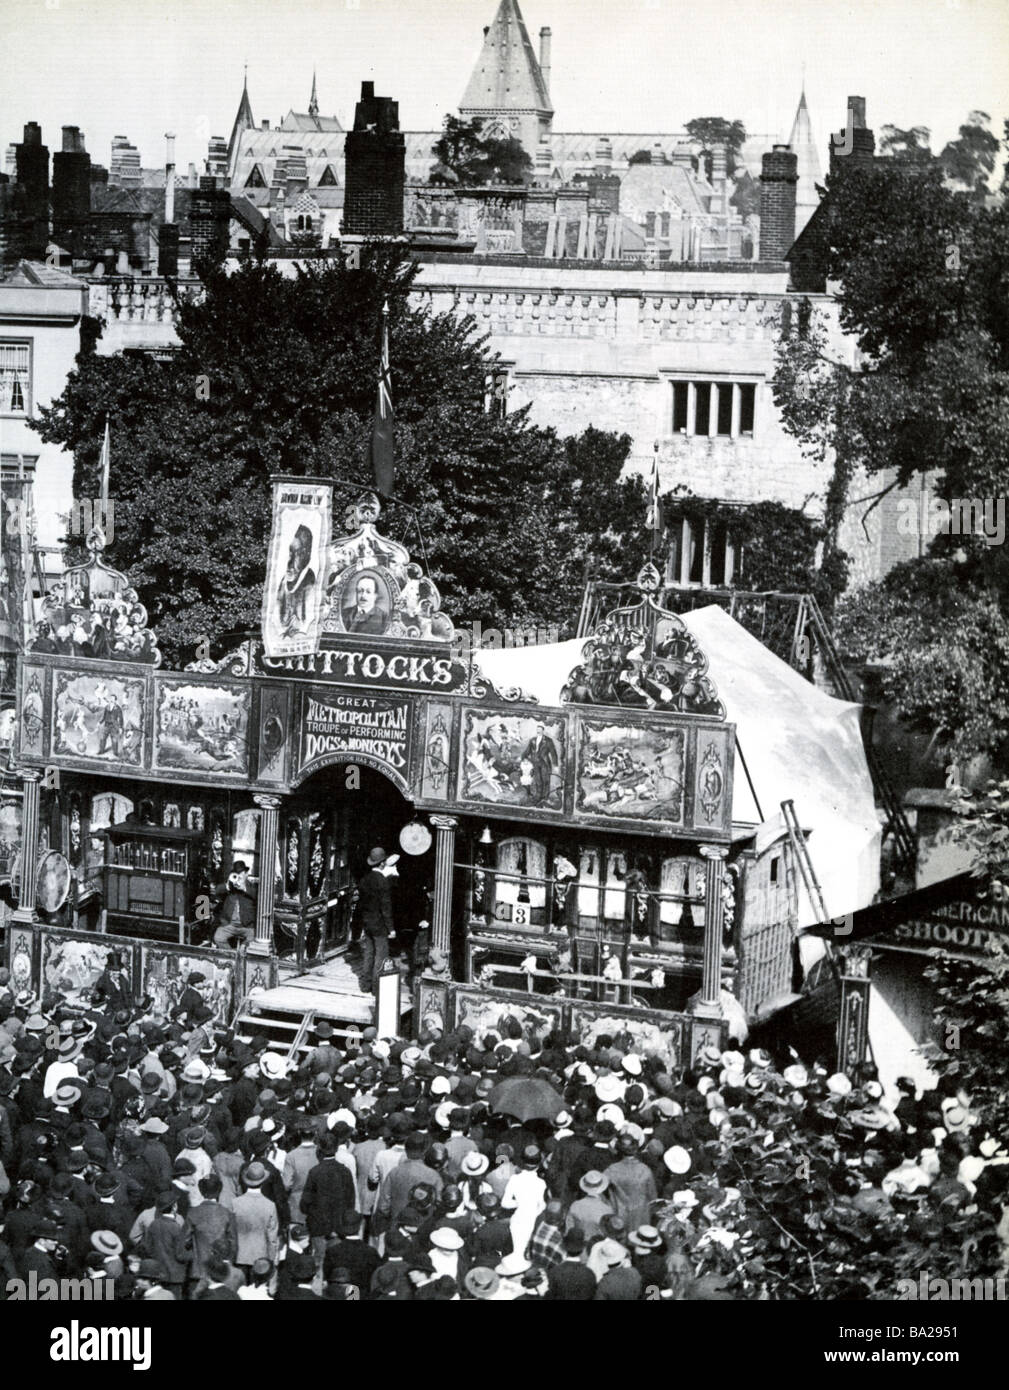 SUMMER FAIR IN OXFORD, ENGLAND. A late 19th century photo shows the Natural History Museum in the background Stock Photo